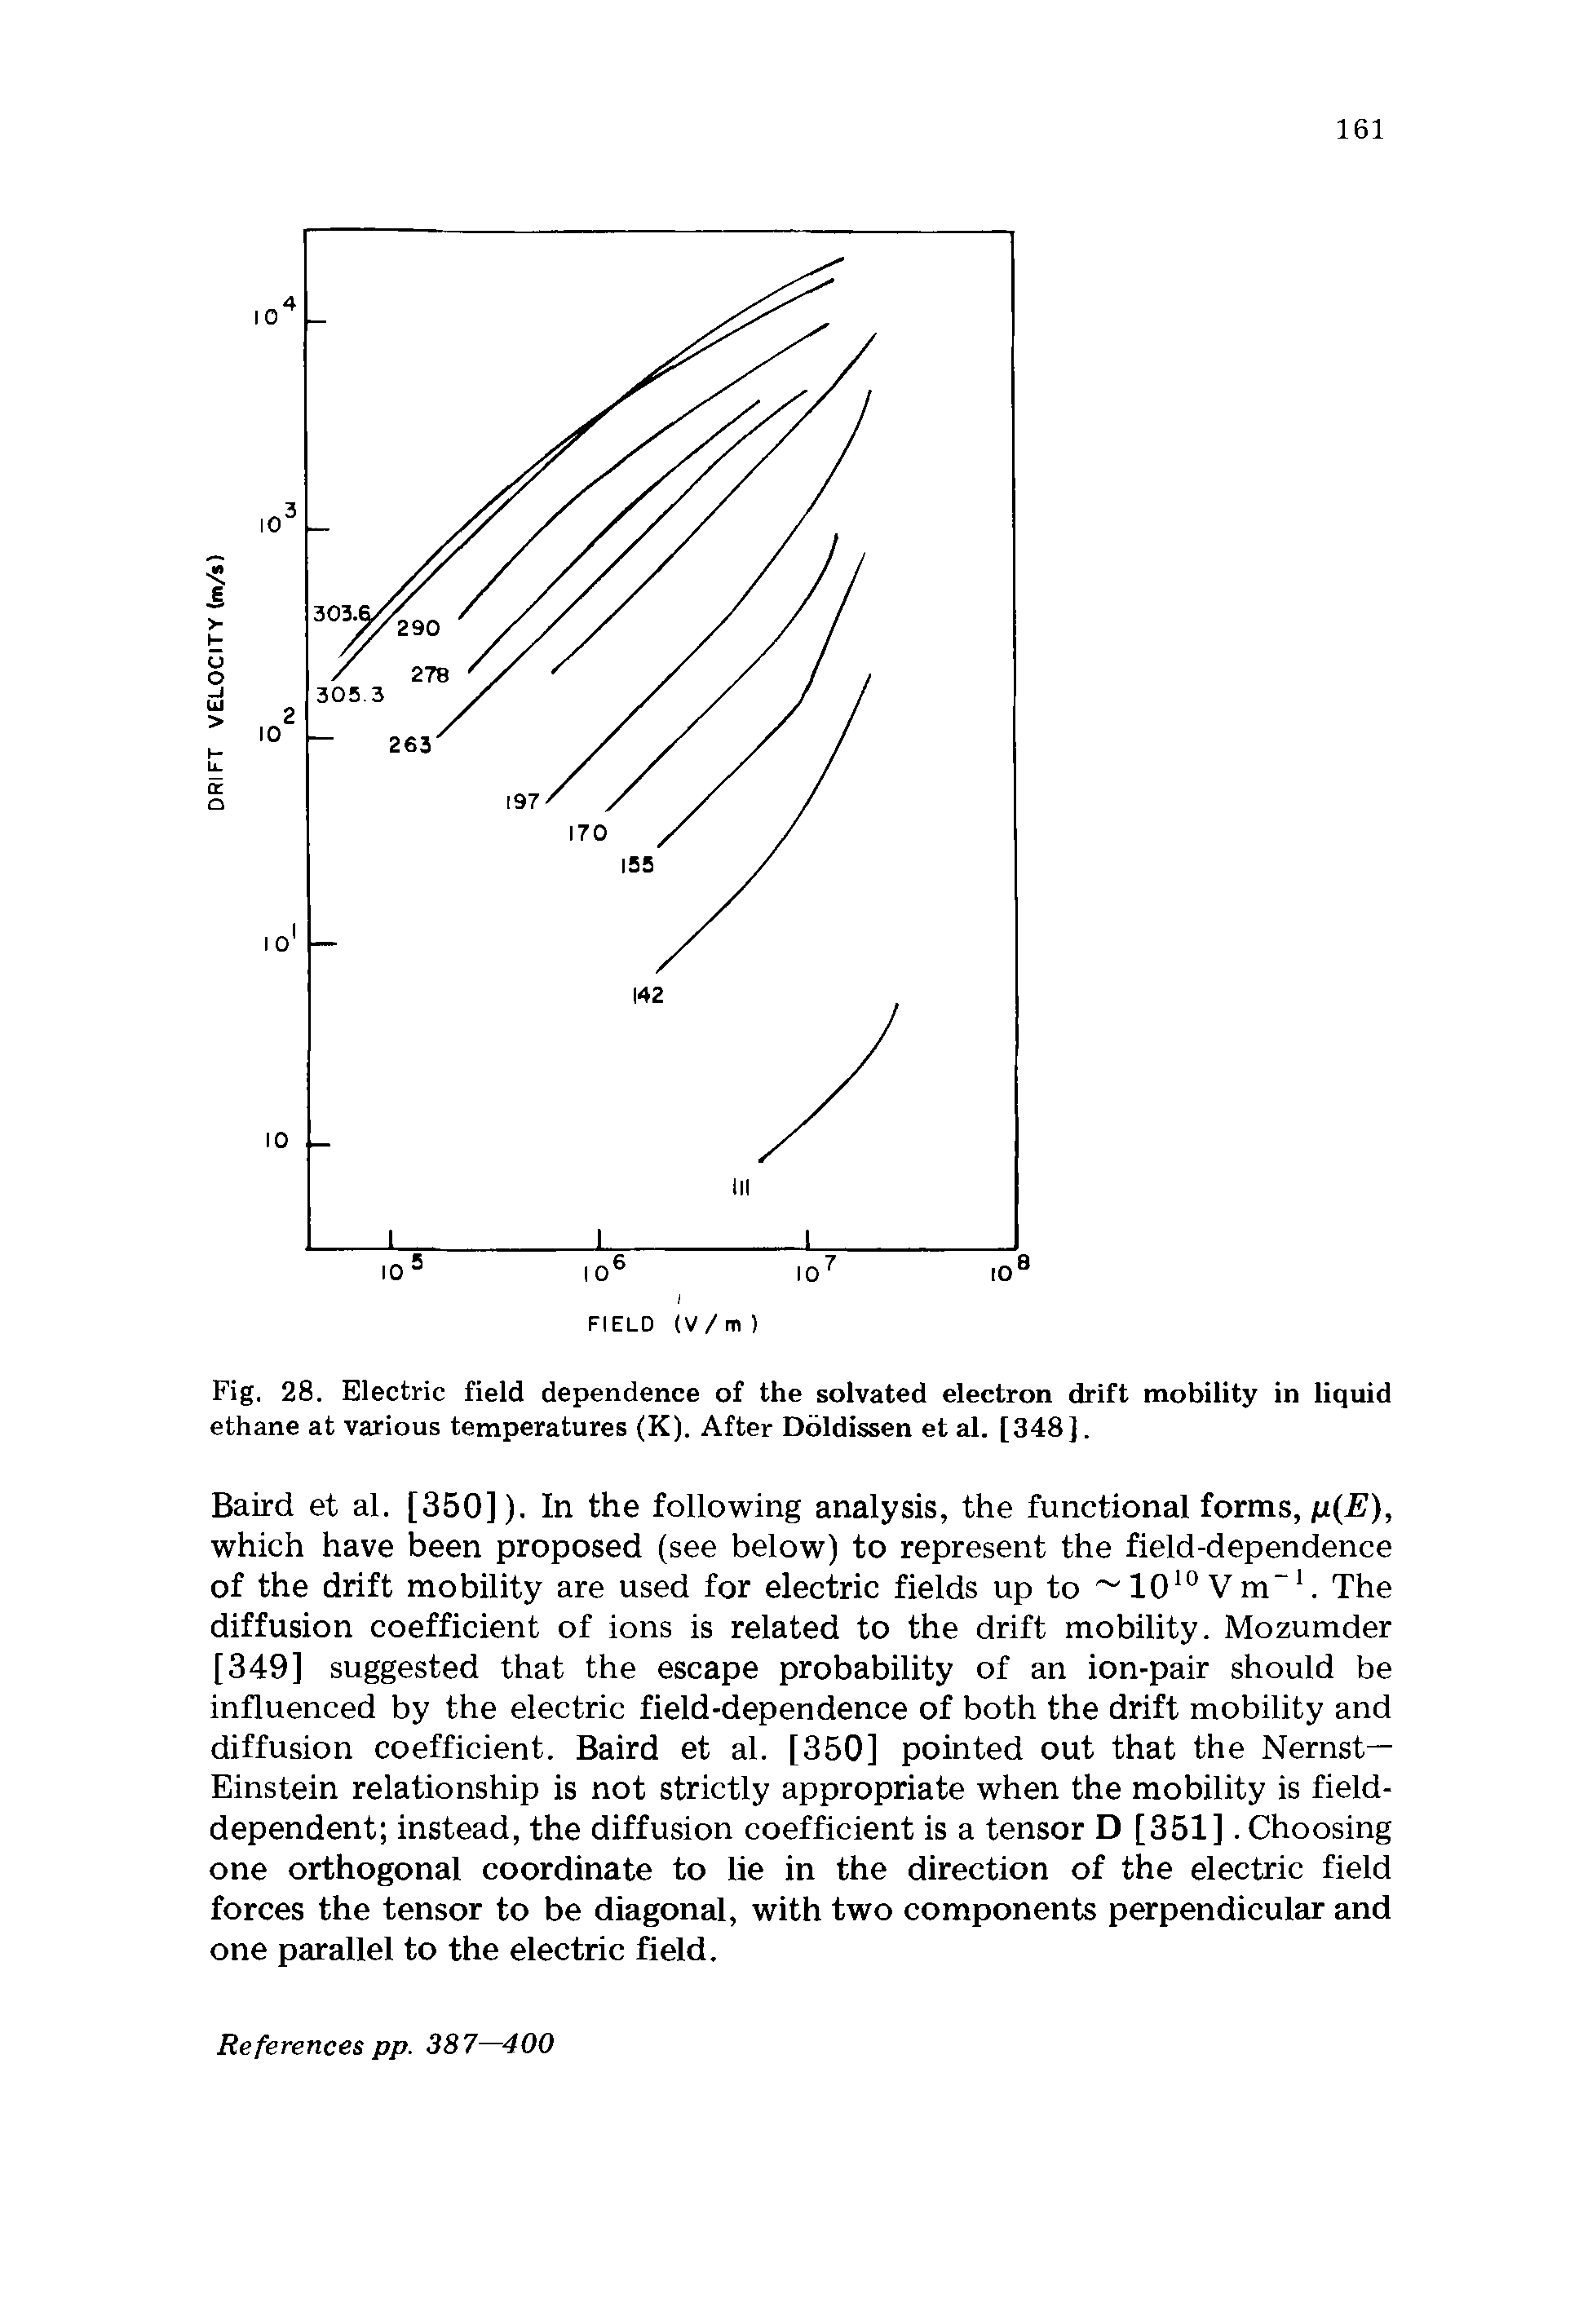 Fig. 28. Electric field dependence of the solvated electron drift mobility in liquid ethane at various temperatures (K). After Doldissen et al. [348].